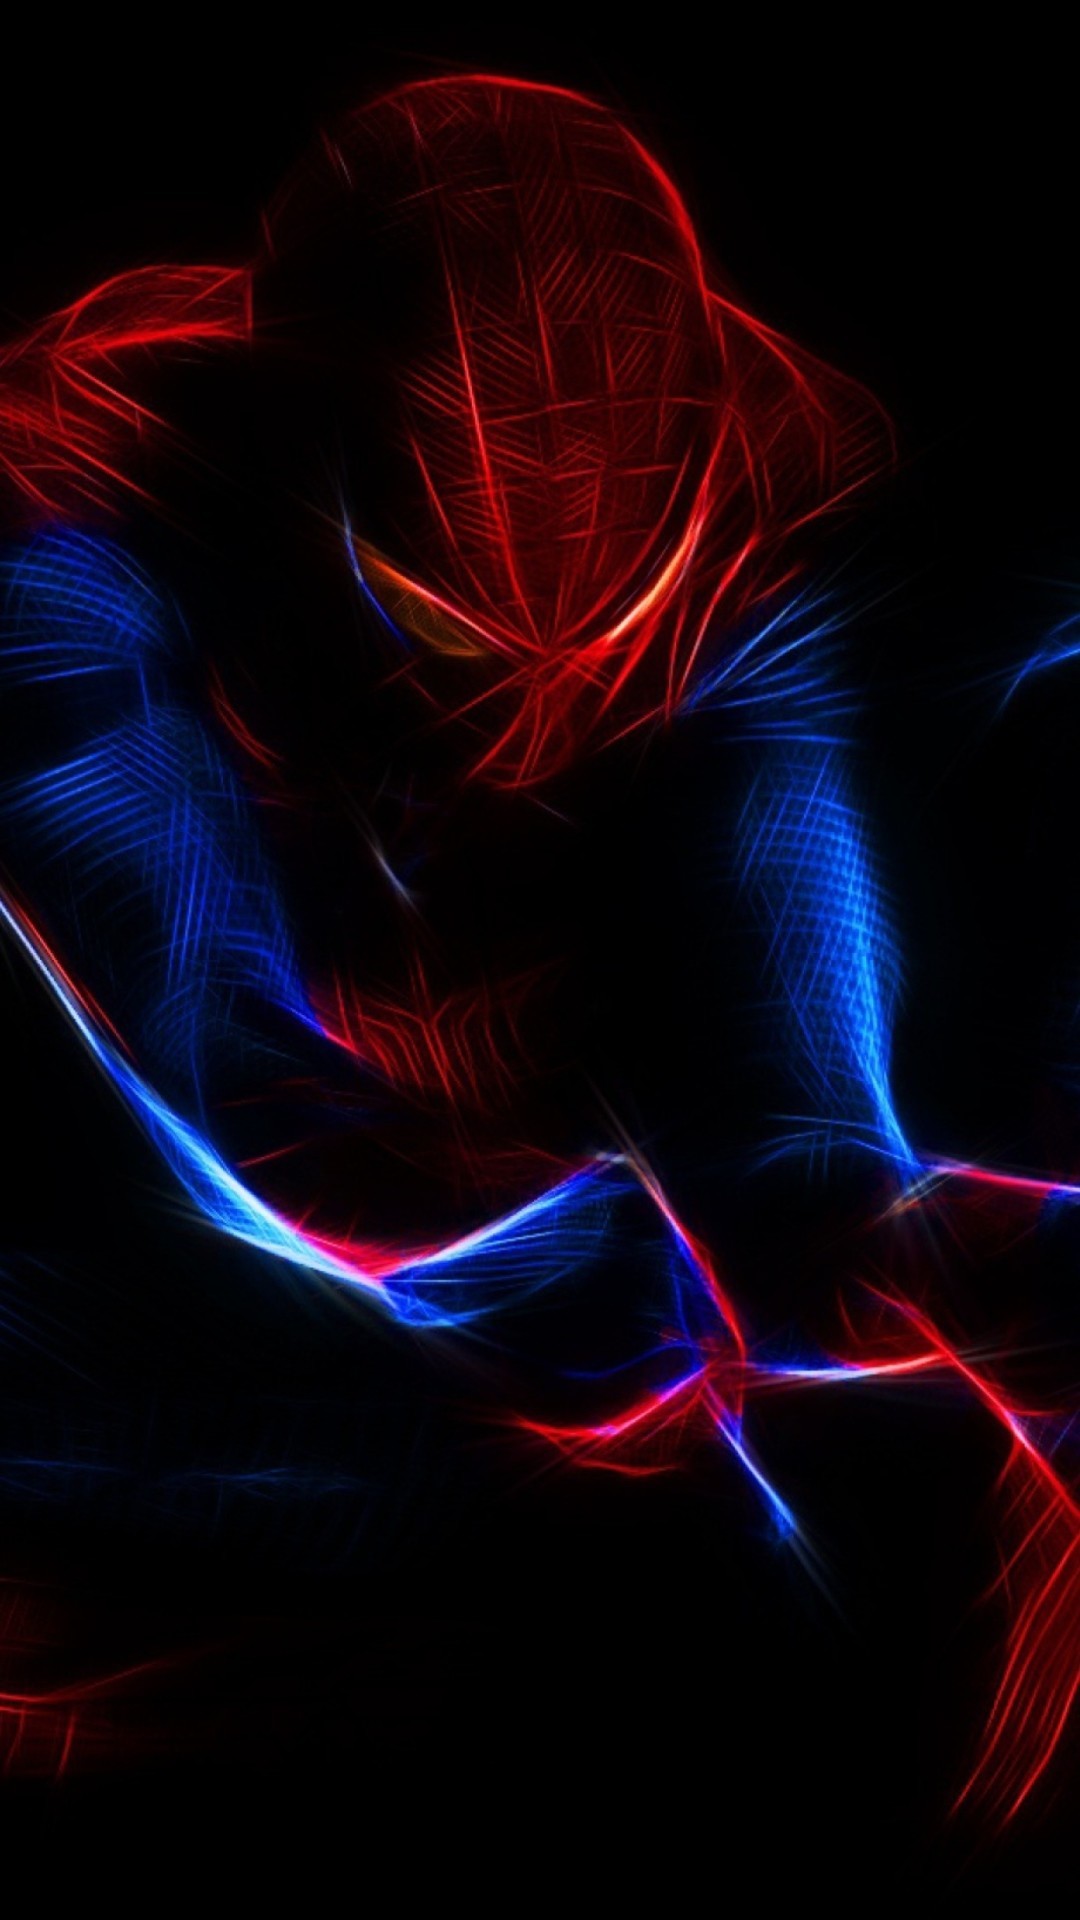 spiderman wallpaper iphone,red,blue,electric blue,light,graphic design